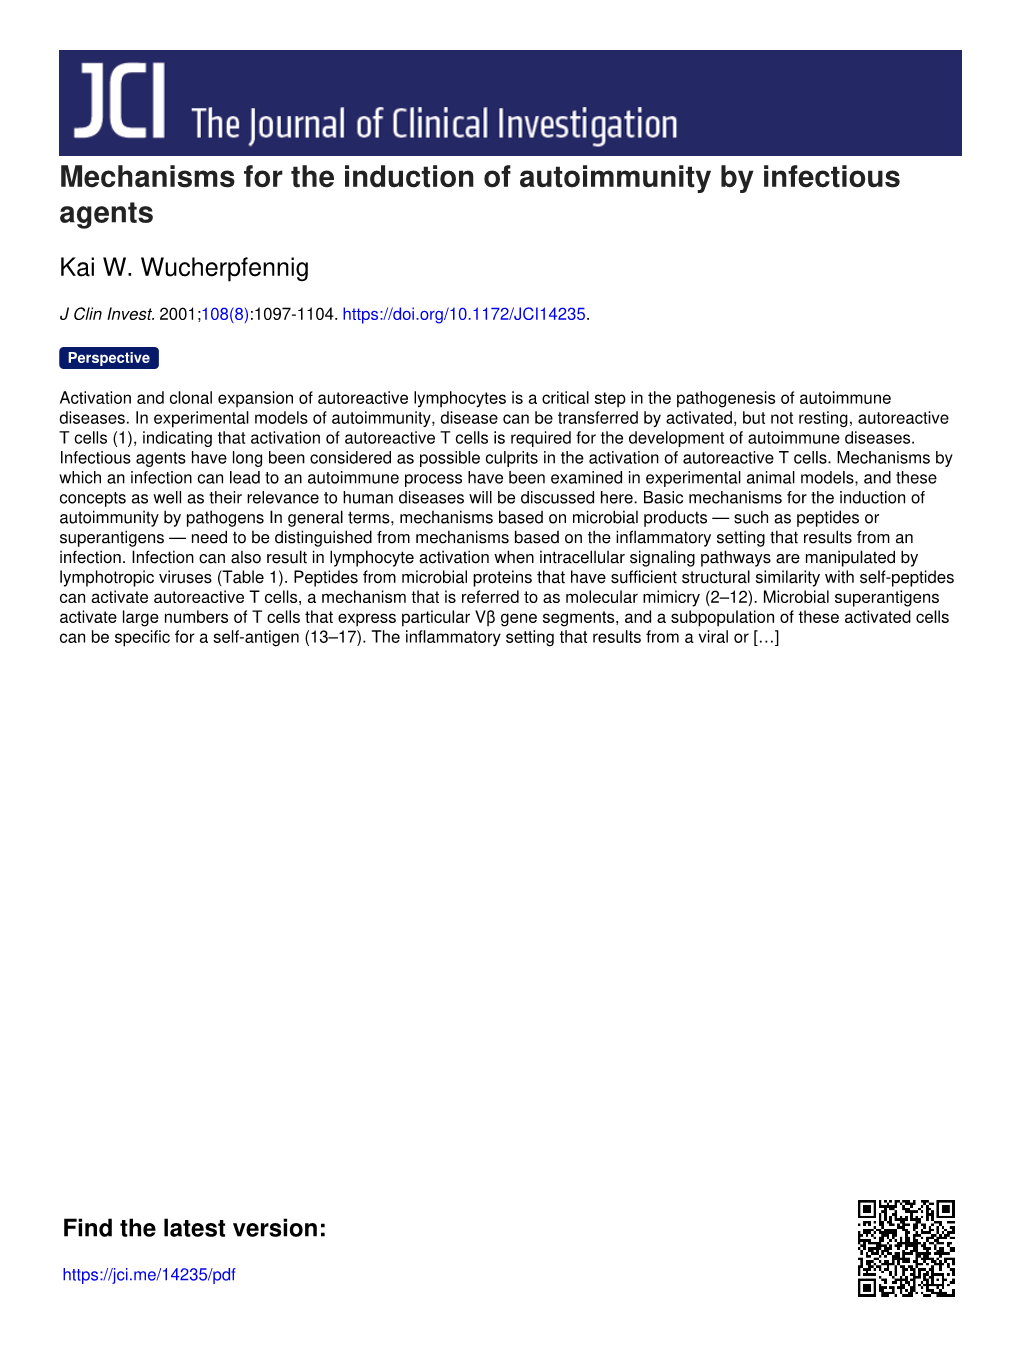 Mechanisms for the Induction of Autoimmunity by Infectious Agents